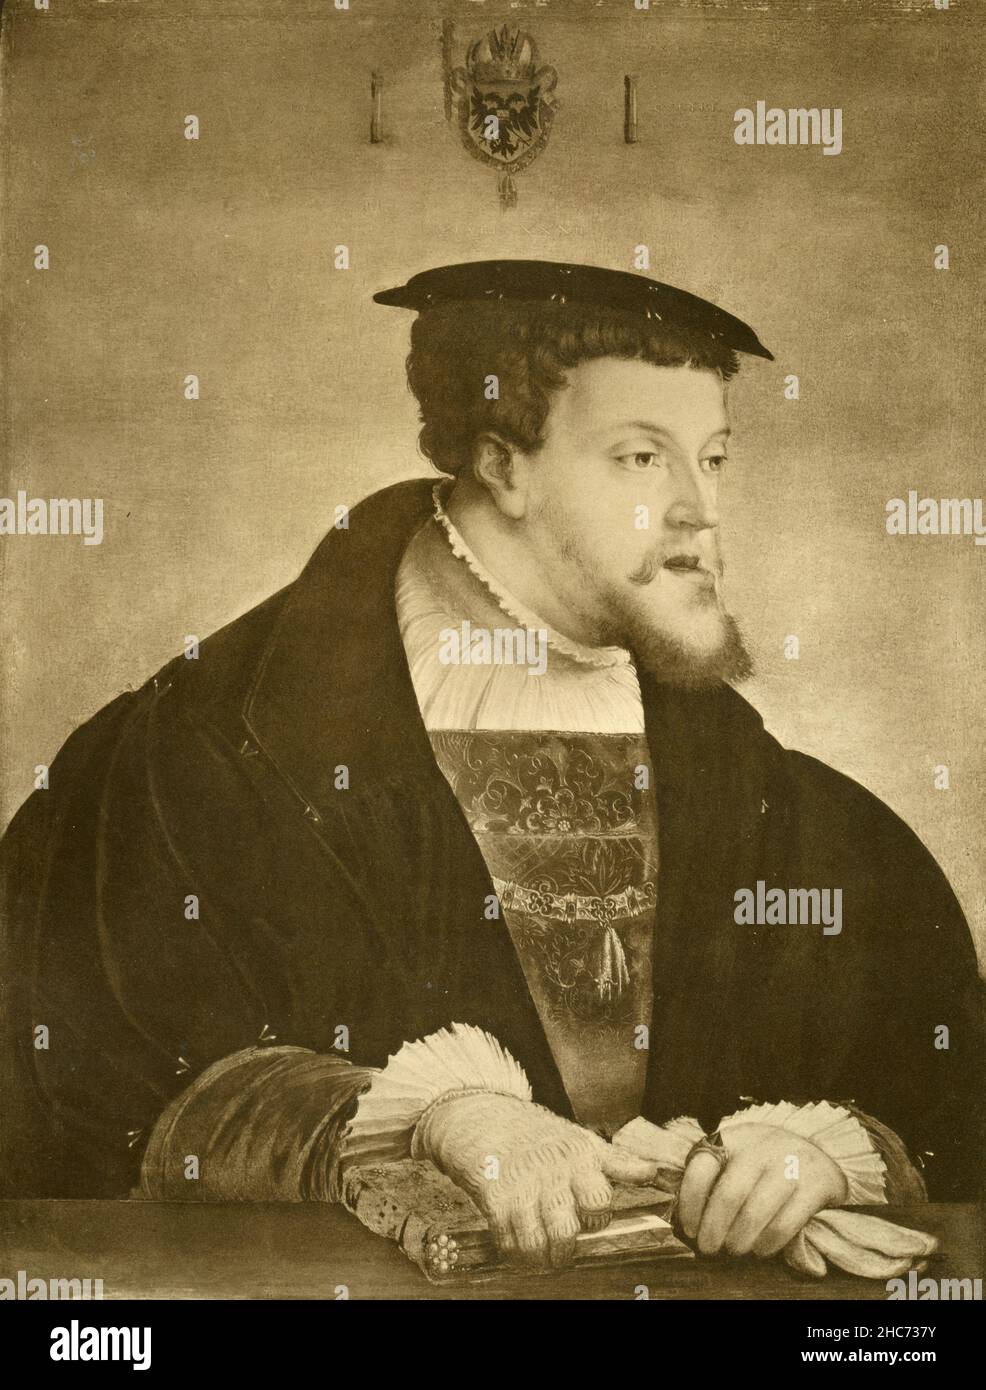 Charles V, Holy Roman Emperor, painting by German artist Christoph Amberger, Munich 1897 Stock Photo